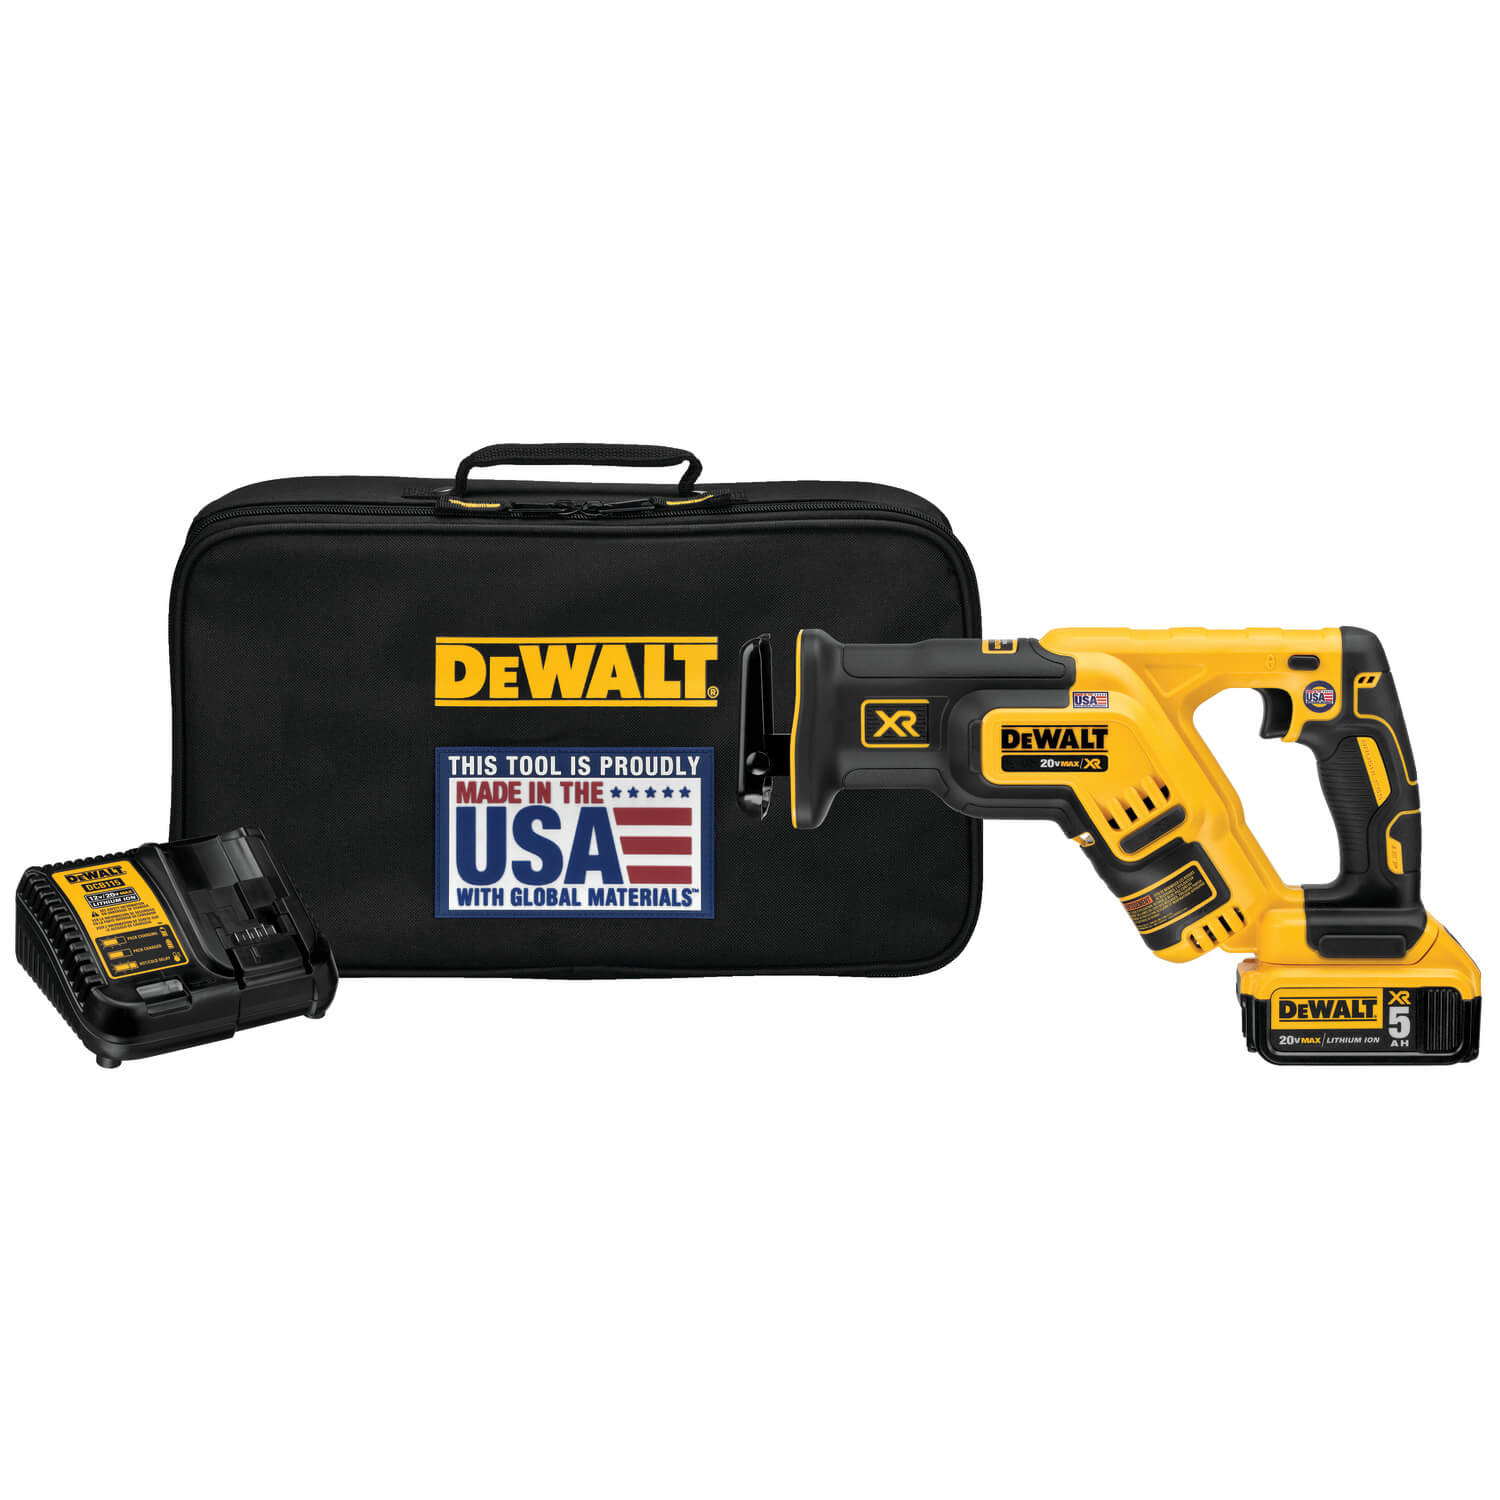 Dewalt DCS367P1 - 20V Brushless Compact Recip Saw Kit - wise-line-tools